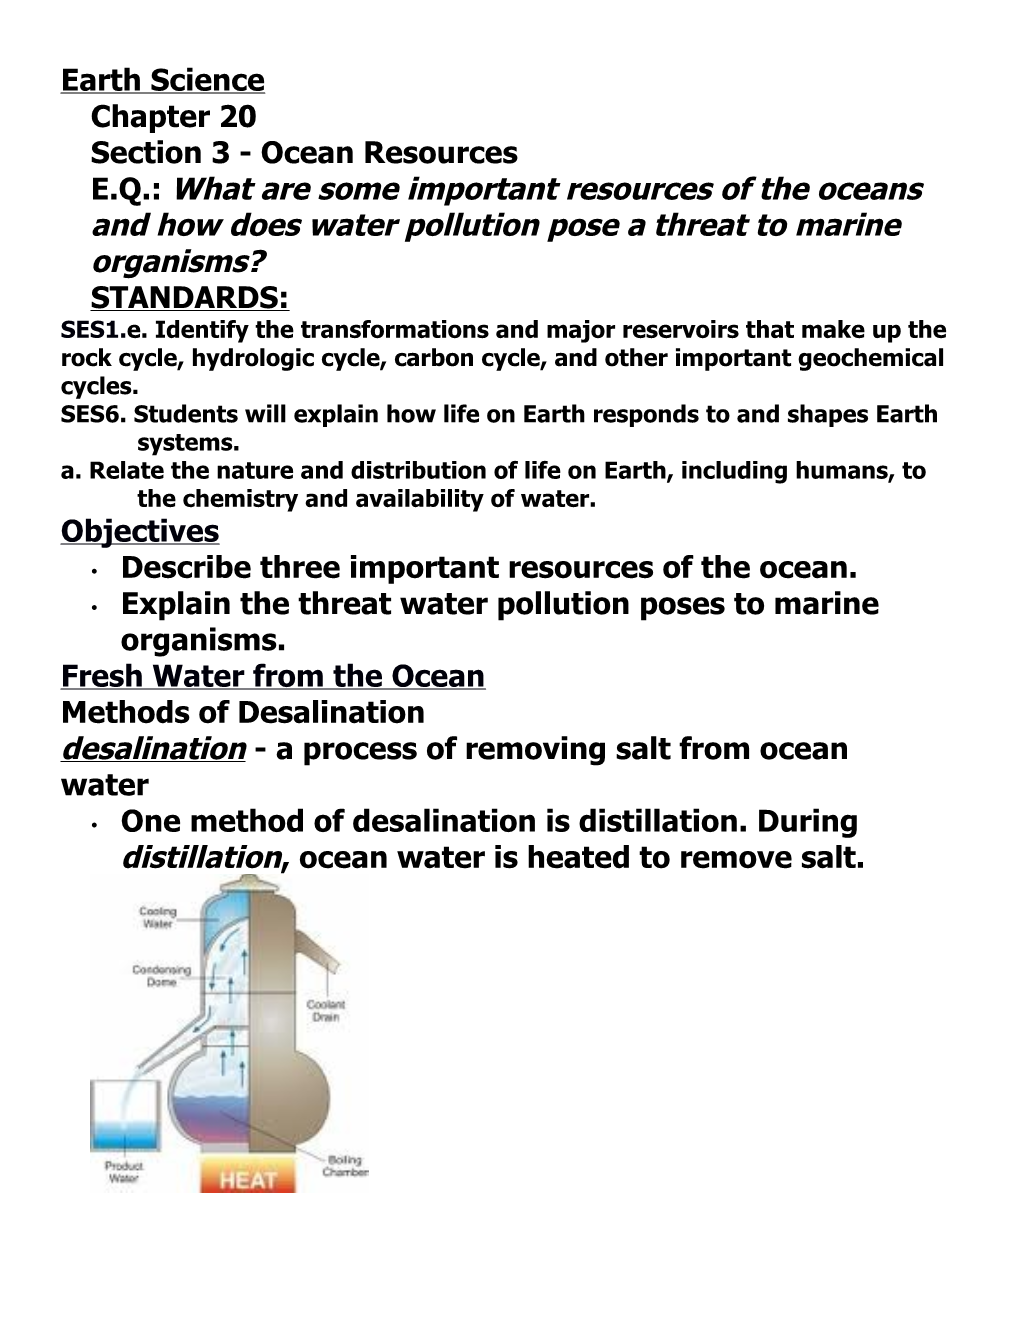 Section 3 - Ocean Resources